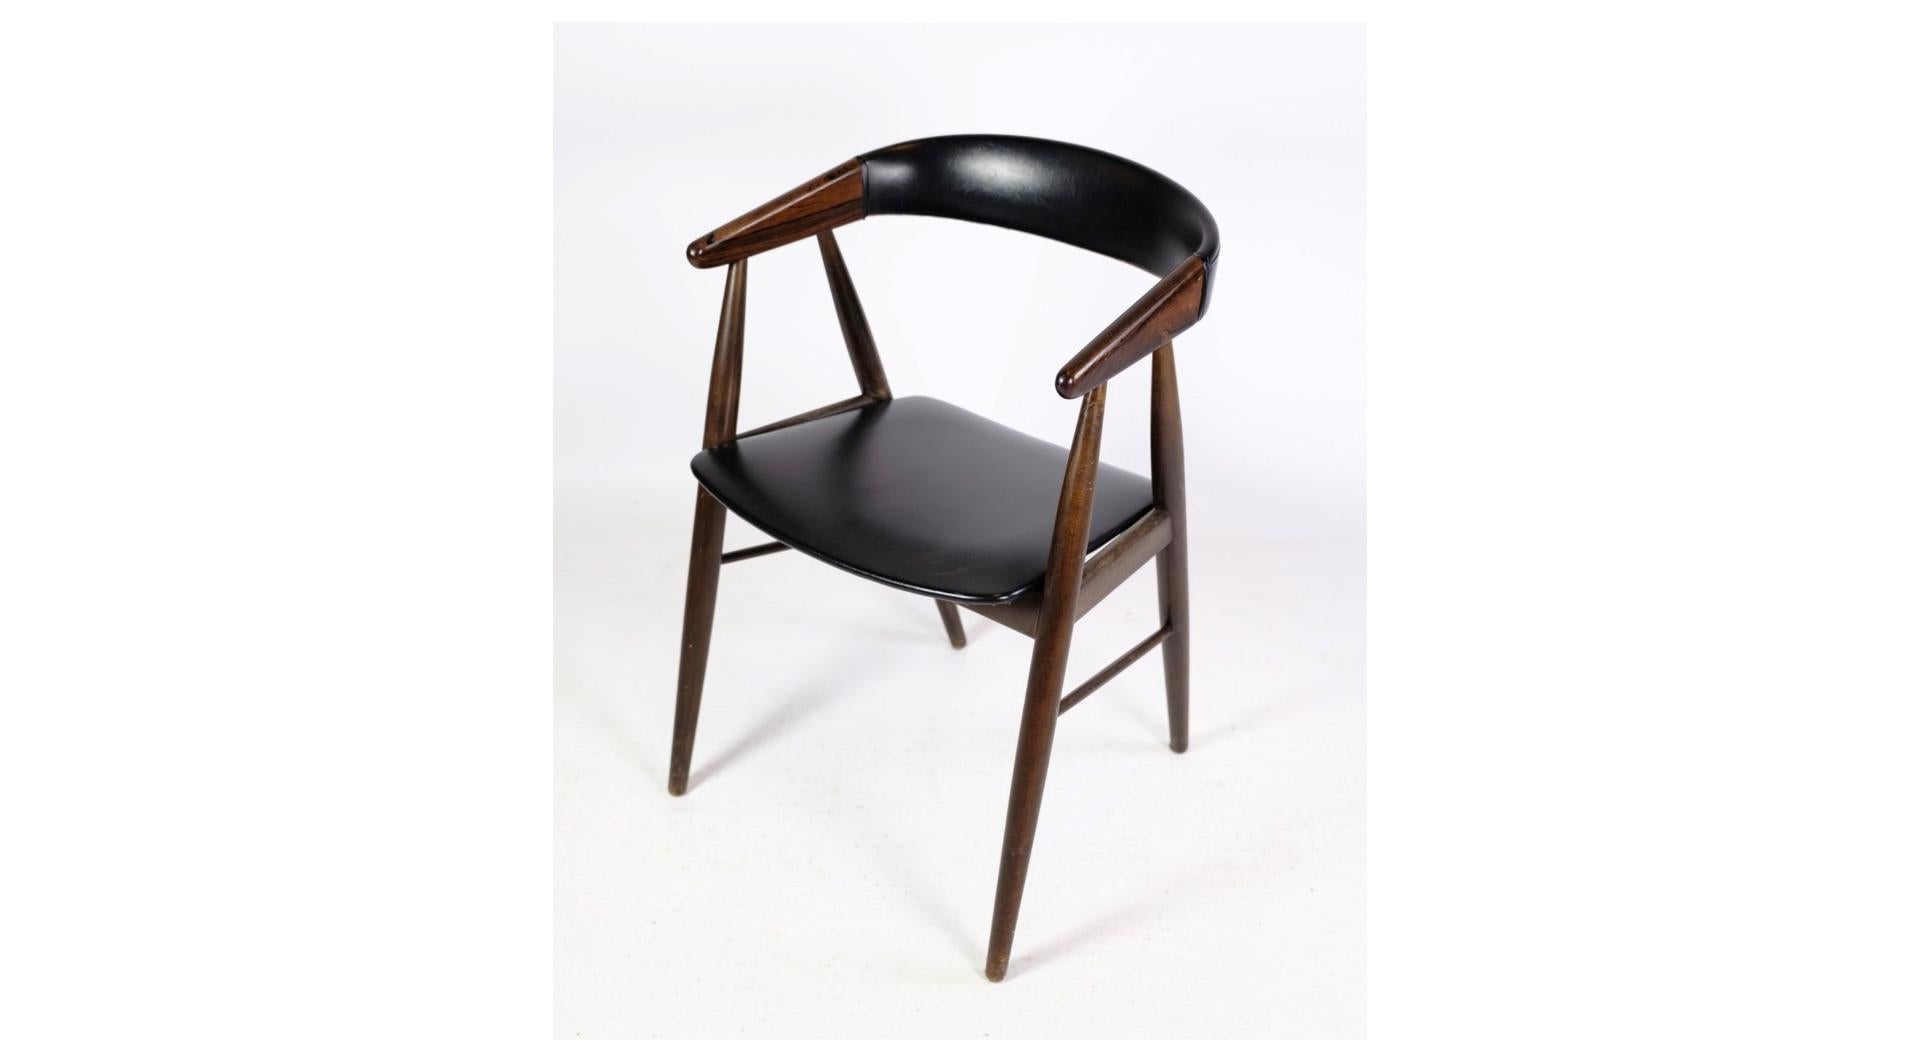 This set of four rosewood chairs, upholstered in sleek black leather, epitomizes the sophistication and craftsmanship of Danish mid-century design.

Designed by the renowned duo Aksel Bender and Ejnar Larsen, these chairs showcase their signature